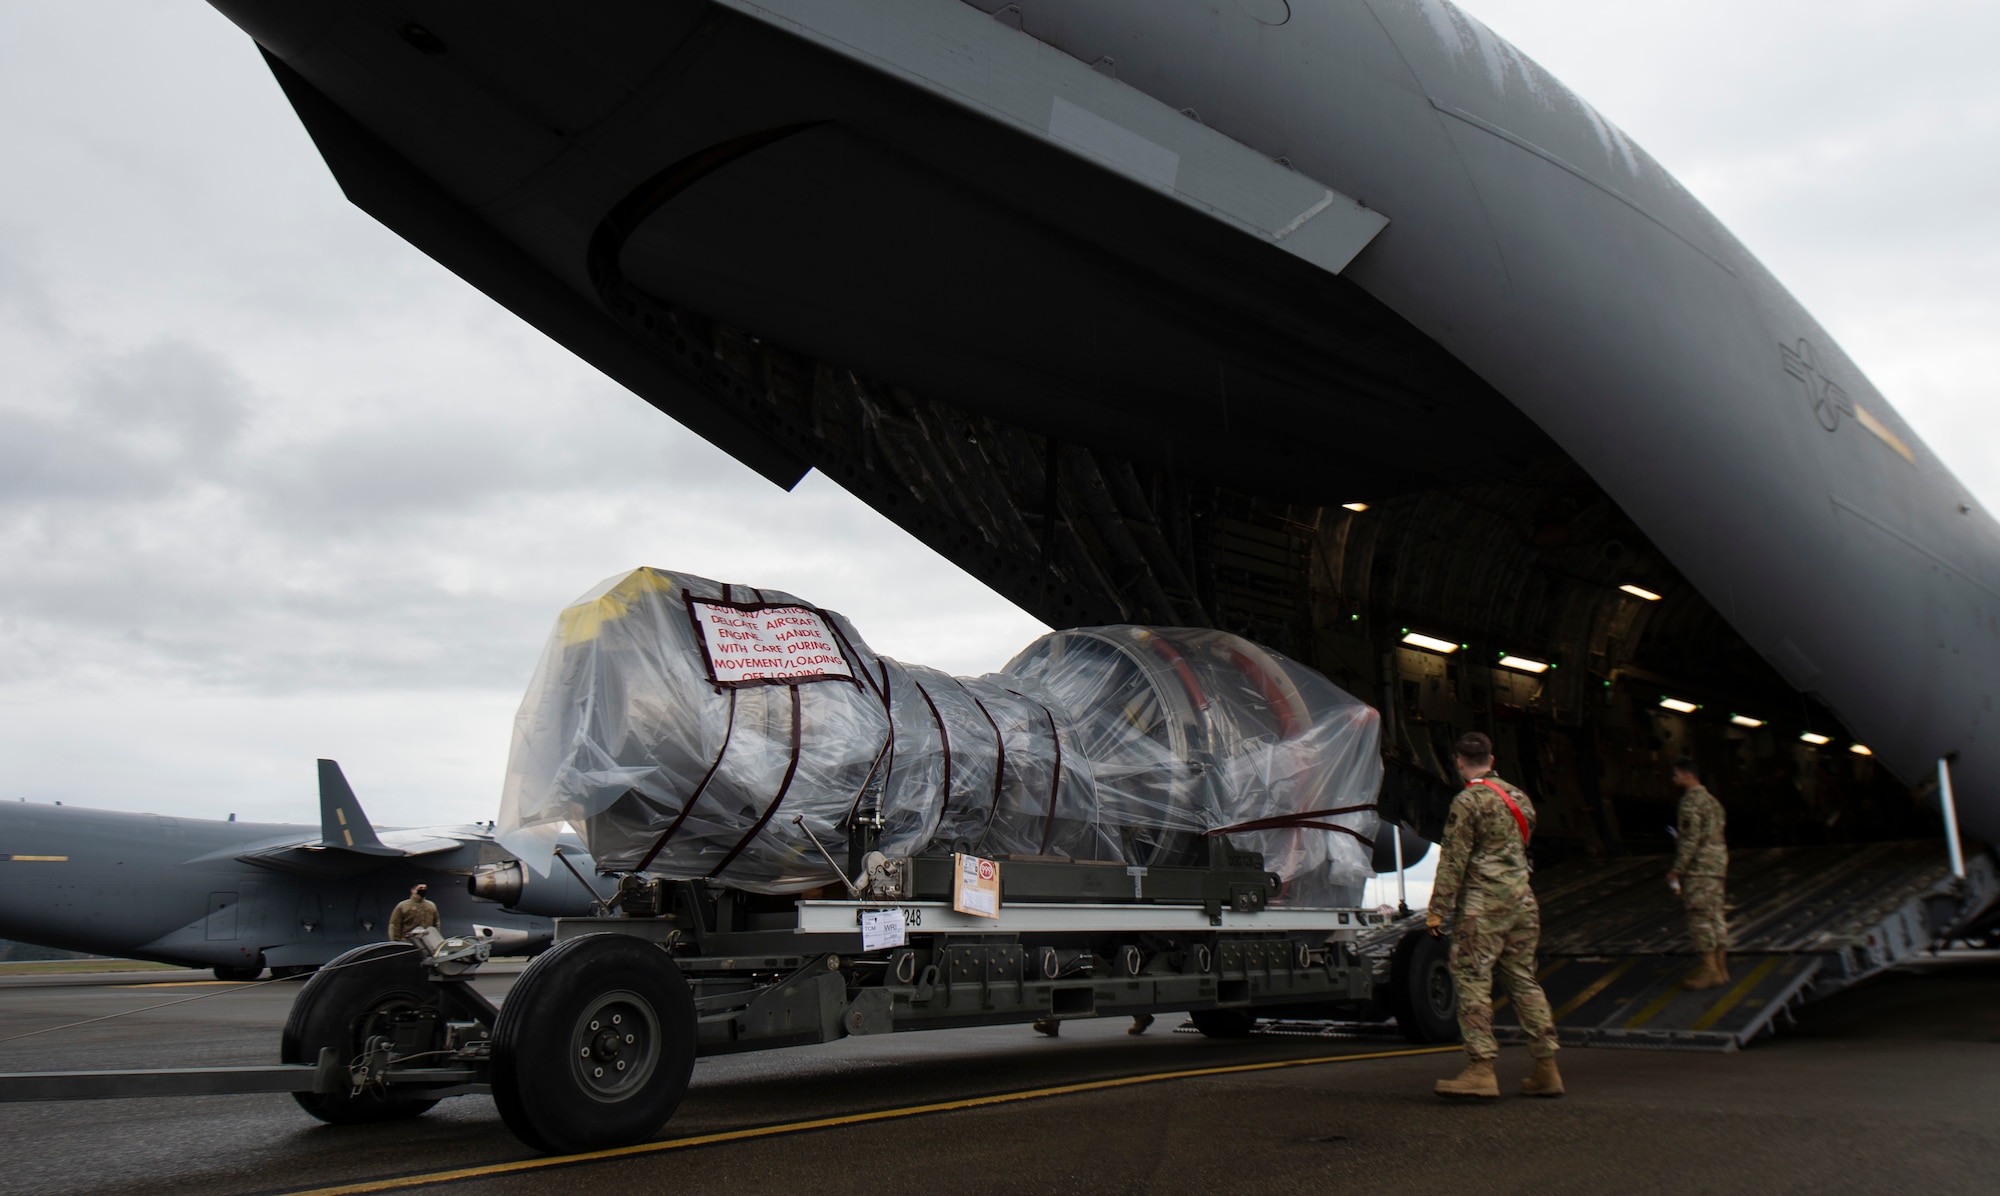 A C-17 Globemaster III jet engine is loaded onto a C-17 at Joint Base Lewis-McChord, Washington, Nov. 27, 2021. The jet engine was being delivered to Joint Base McGuire-Dix-Lakehurst, New Jersey, during the 816th Expeditionary Airlift Squadron deployment swap out at Al Udeid Air Base, Qatar. (U.S. Air Force photo by Staff Sgt. Tryphena Mayhugh)